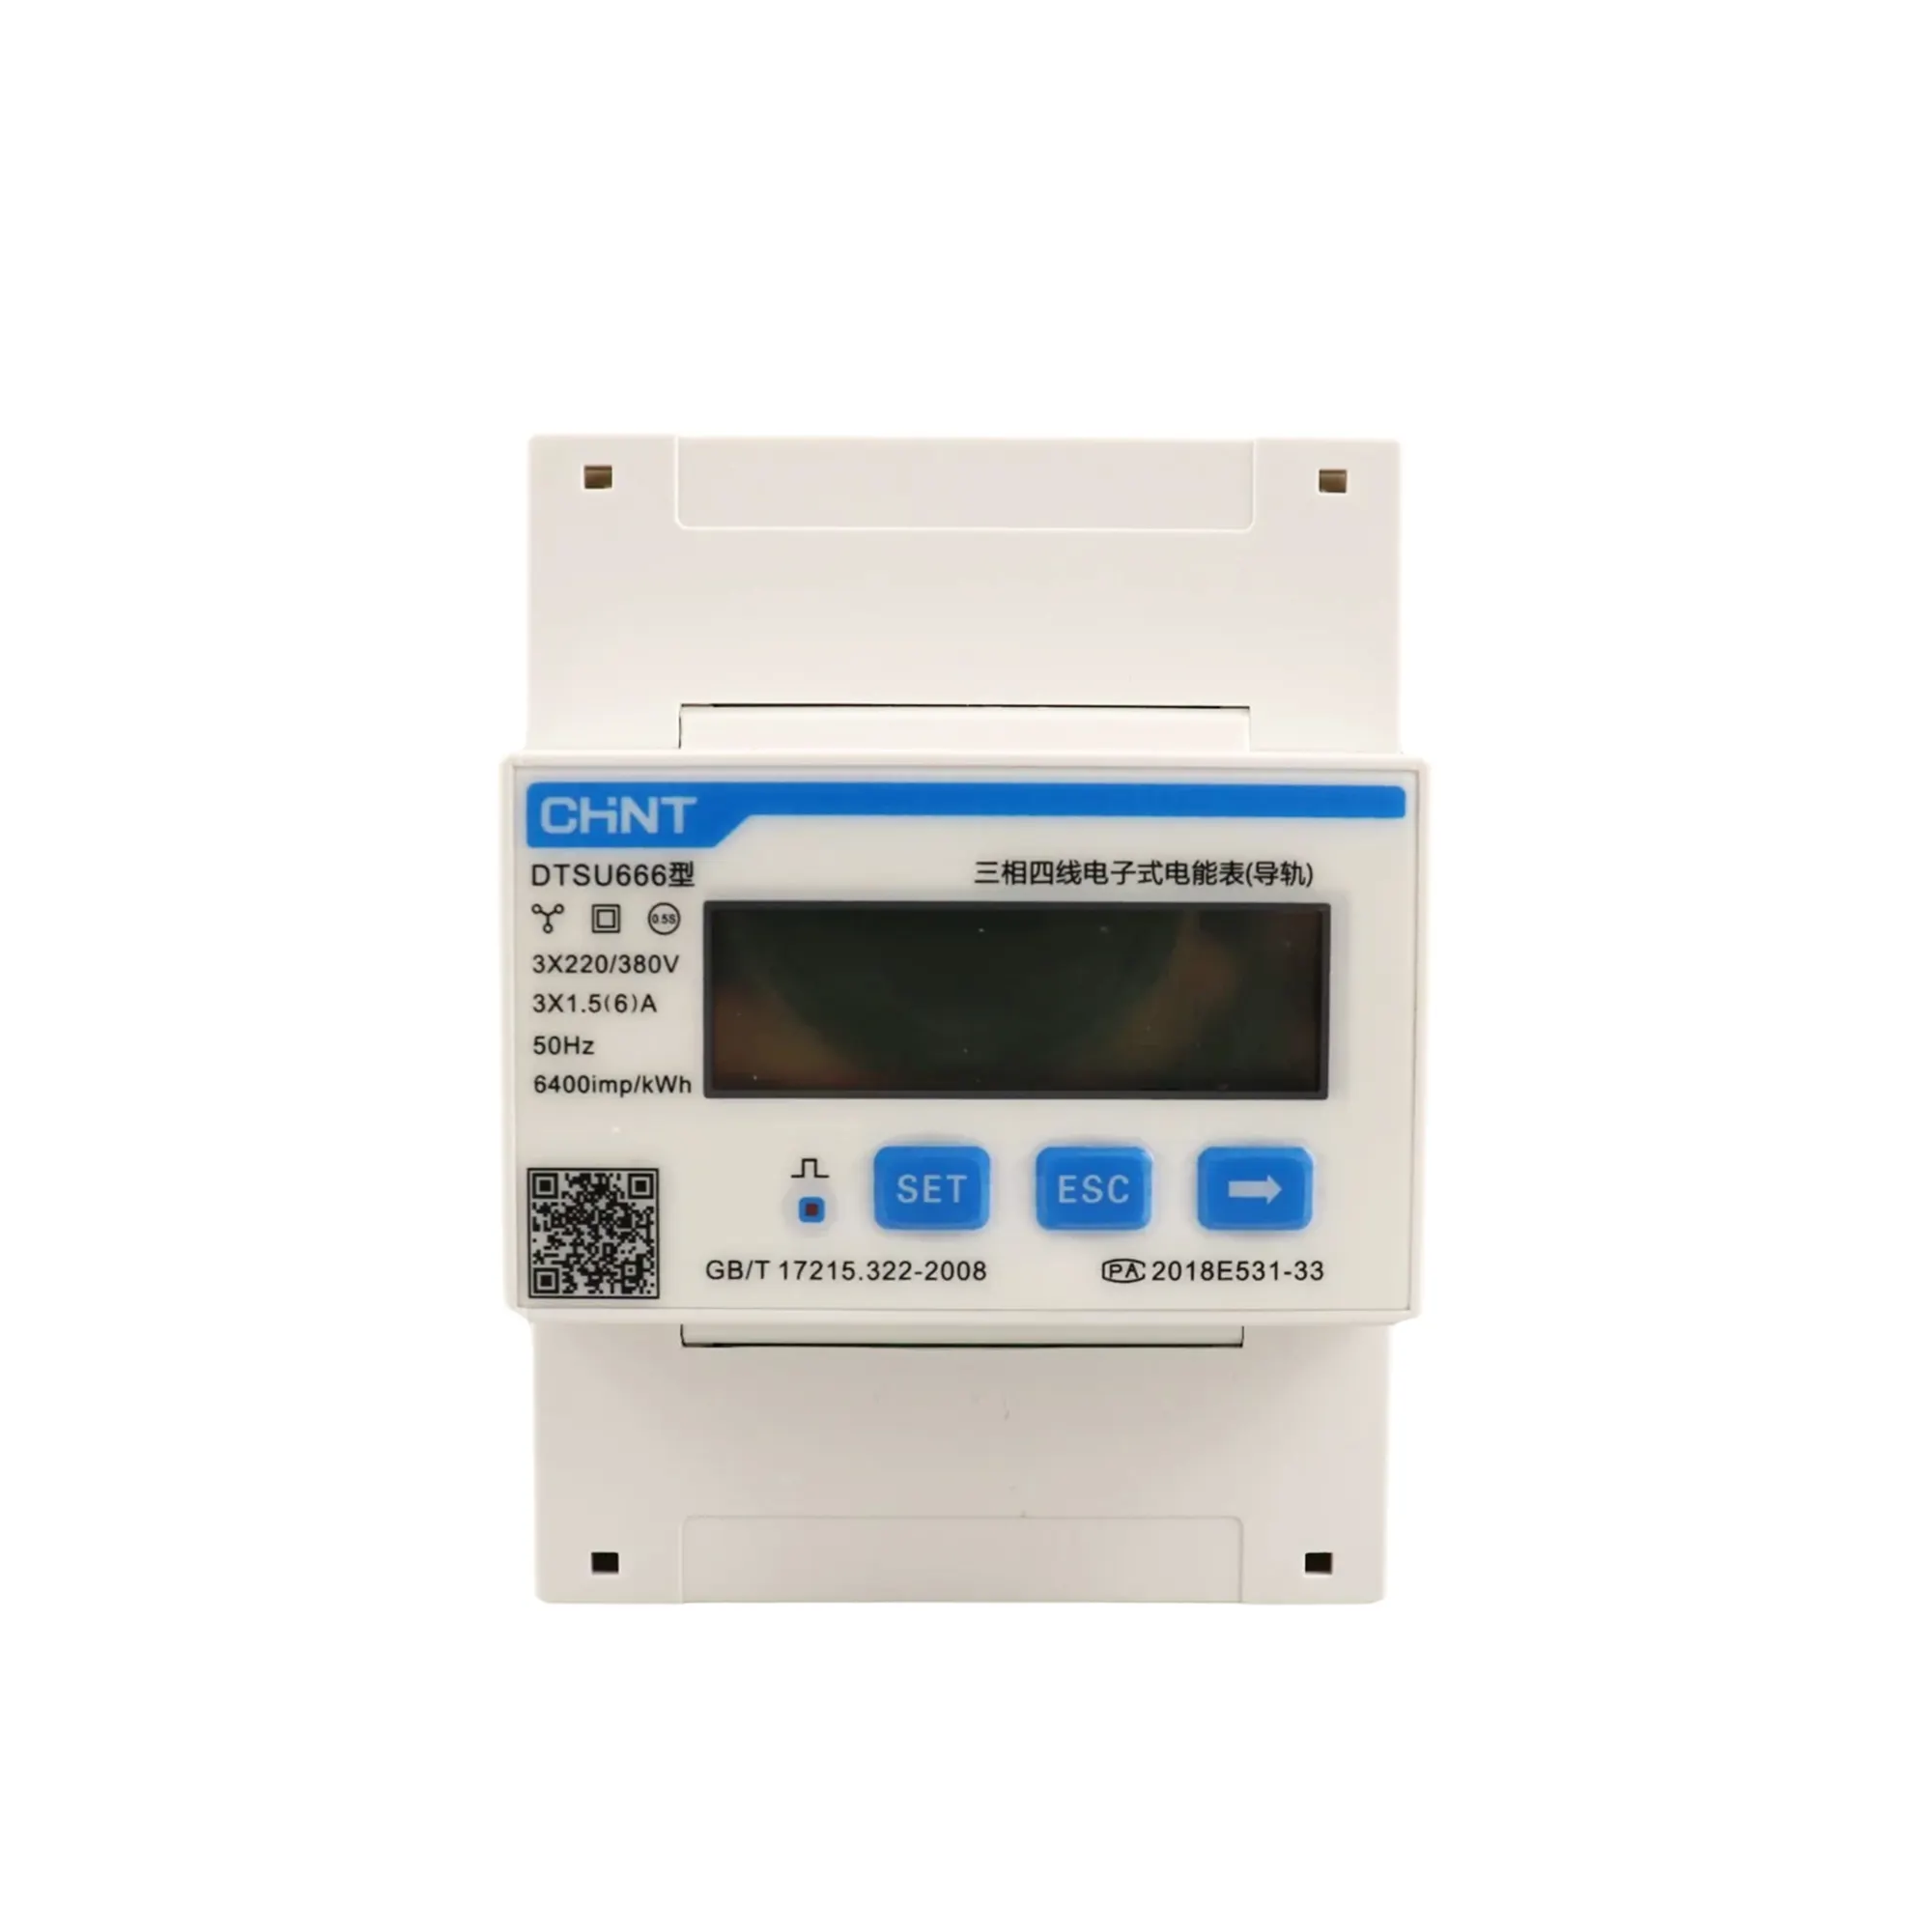 Mechanical Electric Meter China Trade,Buy China Direct From 